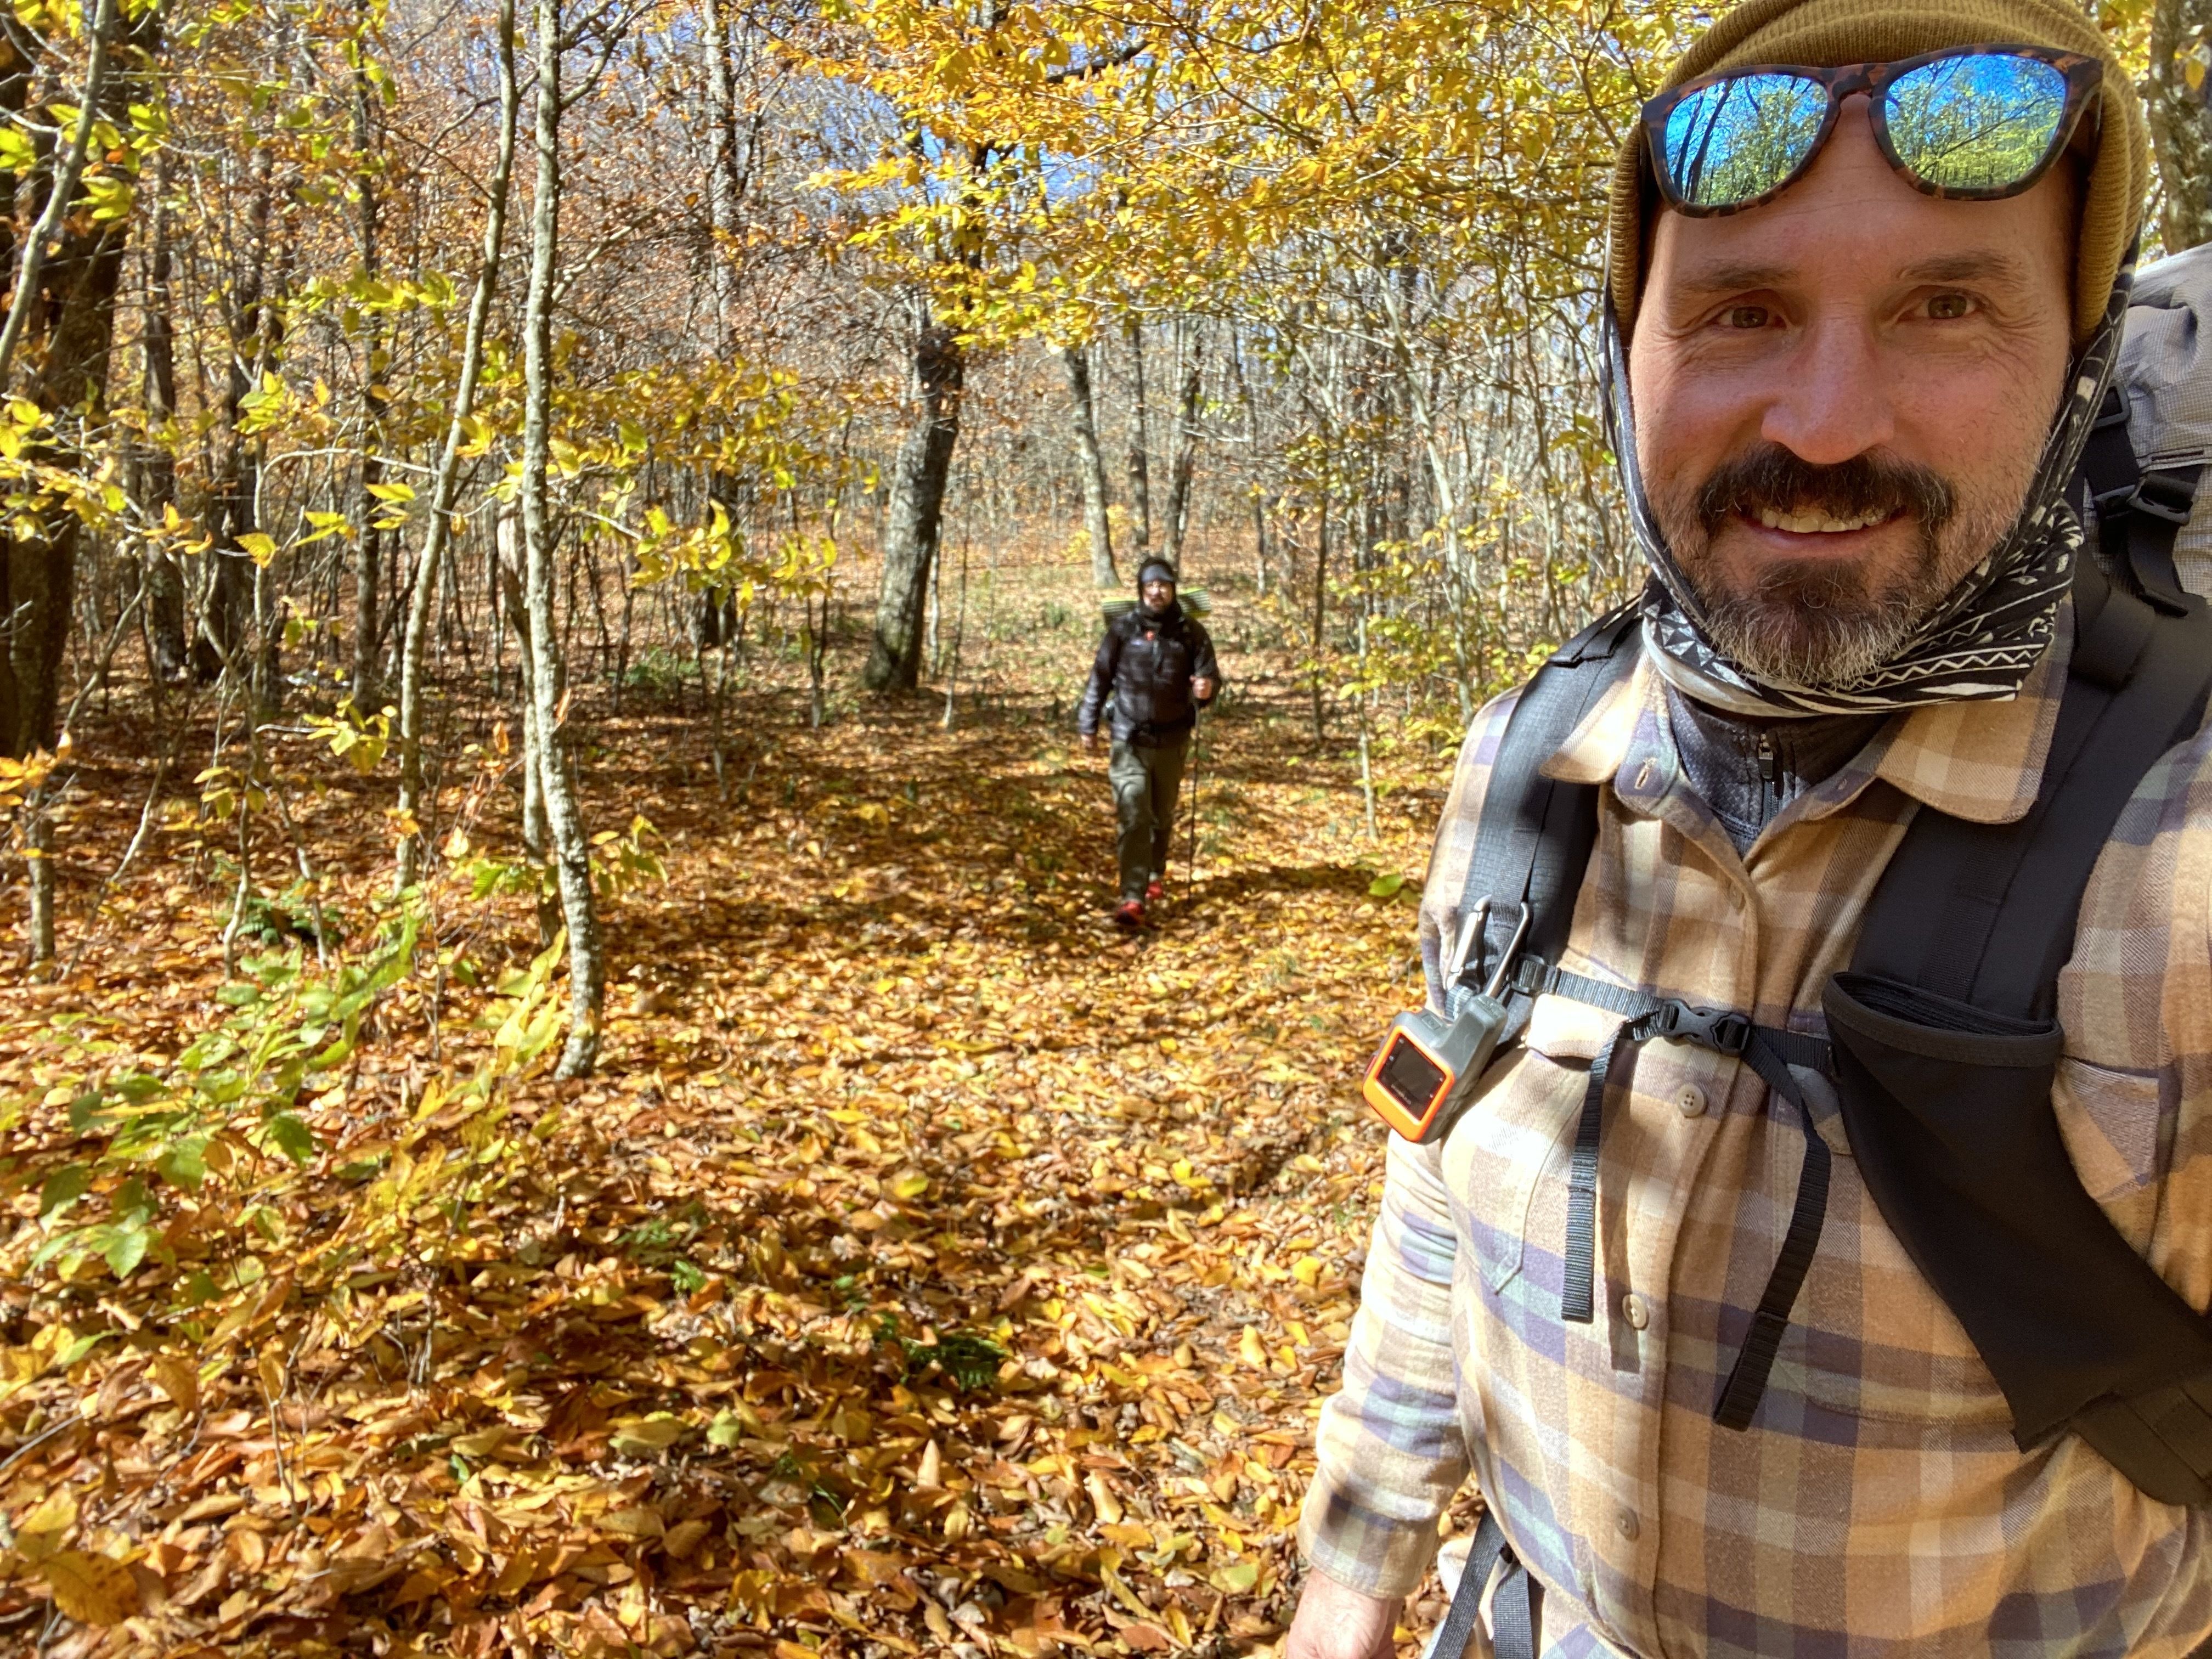 Ben Montgomery and friend hiking the appalachian trail through glorious leaves.